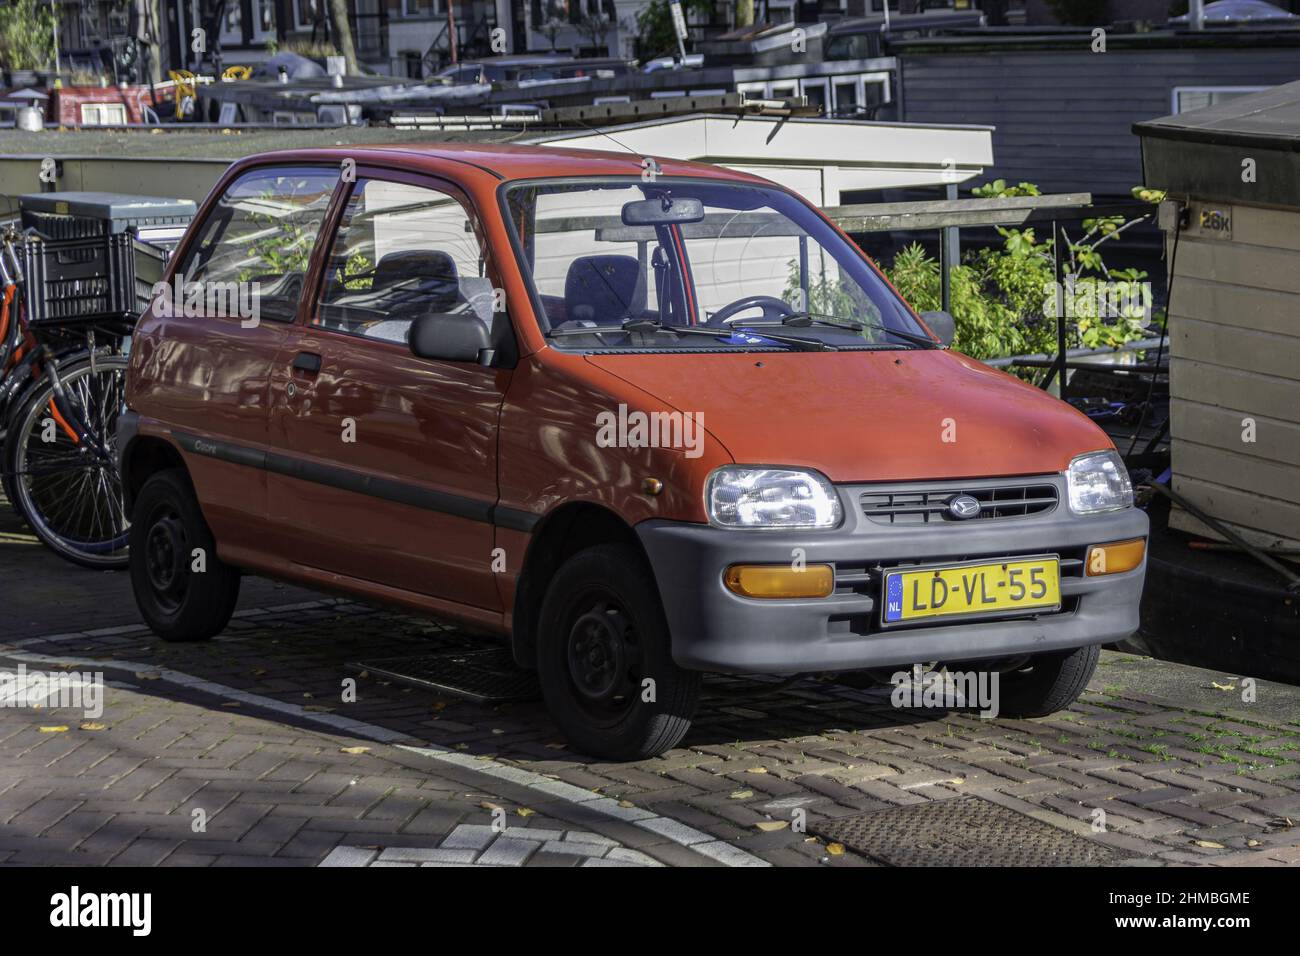 Red Daihatsu Cuore kei car parked in the street Stock Photo